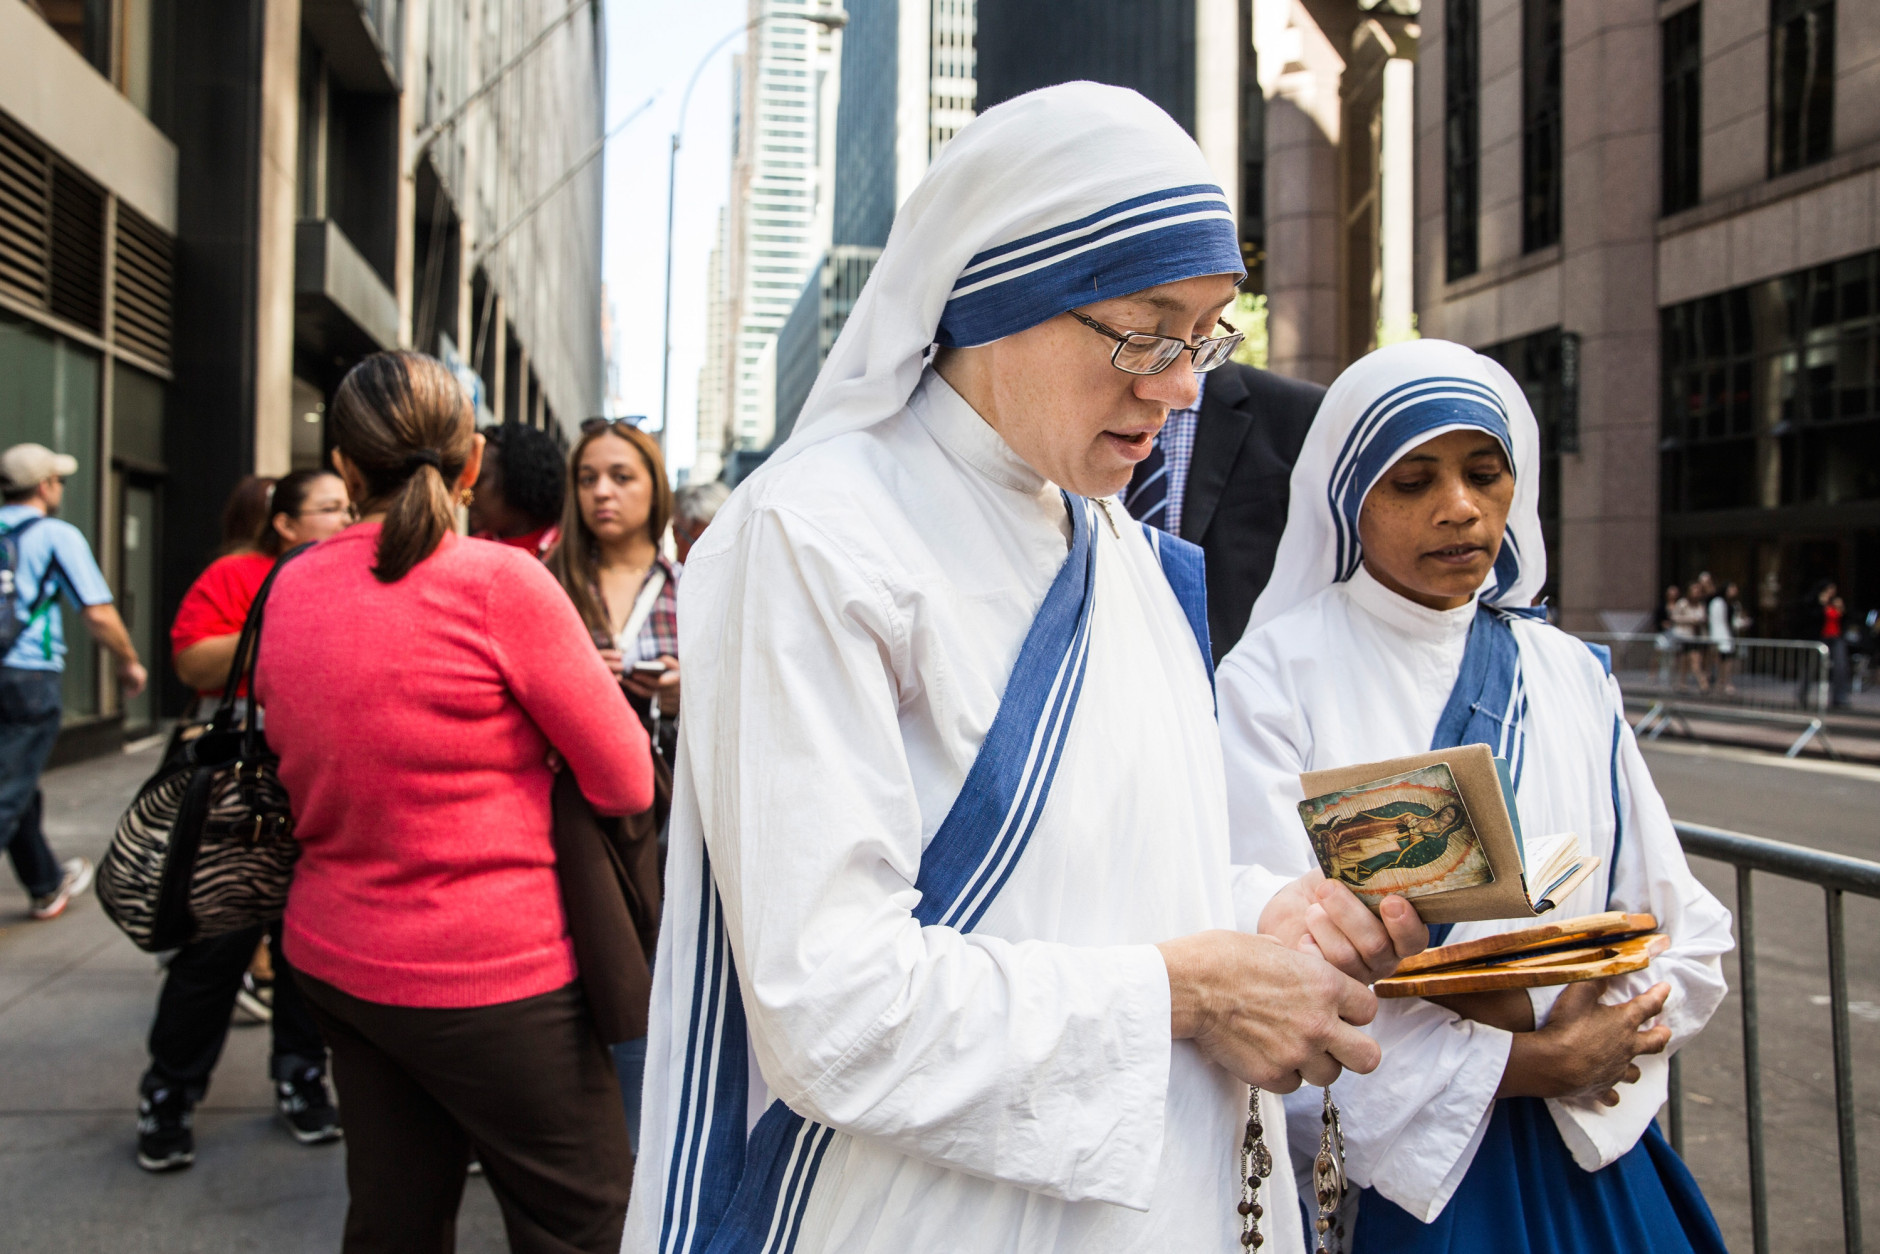 NEW YORK, NY - SEPTEMBER 24:  Sister Mary Marta (L) and Sister Marie Frank, both of Missionaries of Charity Convent, pray while waiting in line to stand along 5th Avenue to watch as Pope Francis drives by while he is en route to St. Patrick's Cathedral on September 24, 2015 in New York City.  The Pope will speak tonight at St. Patrick's Cathedral; he is scheduled to land at John F. Kennedy Airport at 5P.M. this evening.  (Photo by Andrew Burton/Getty Images)